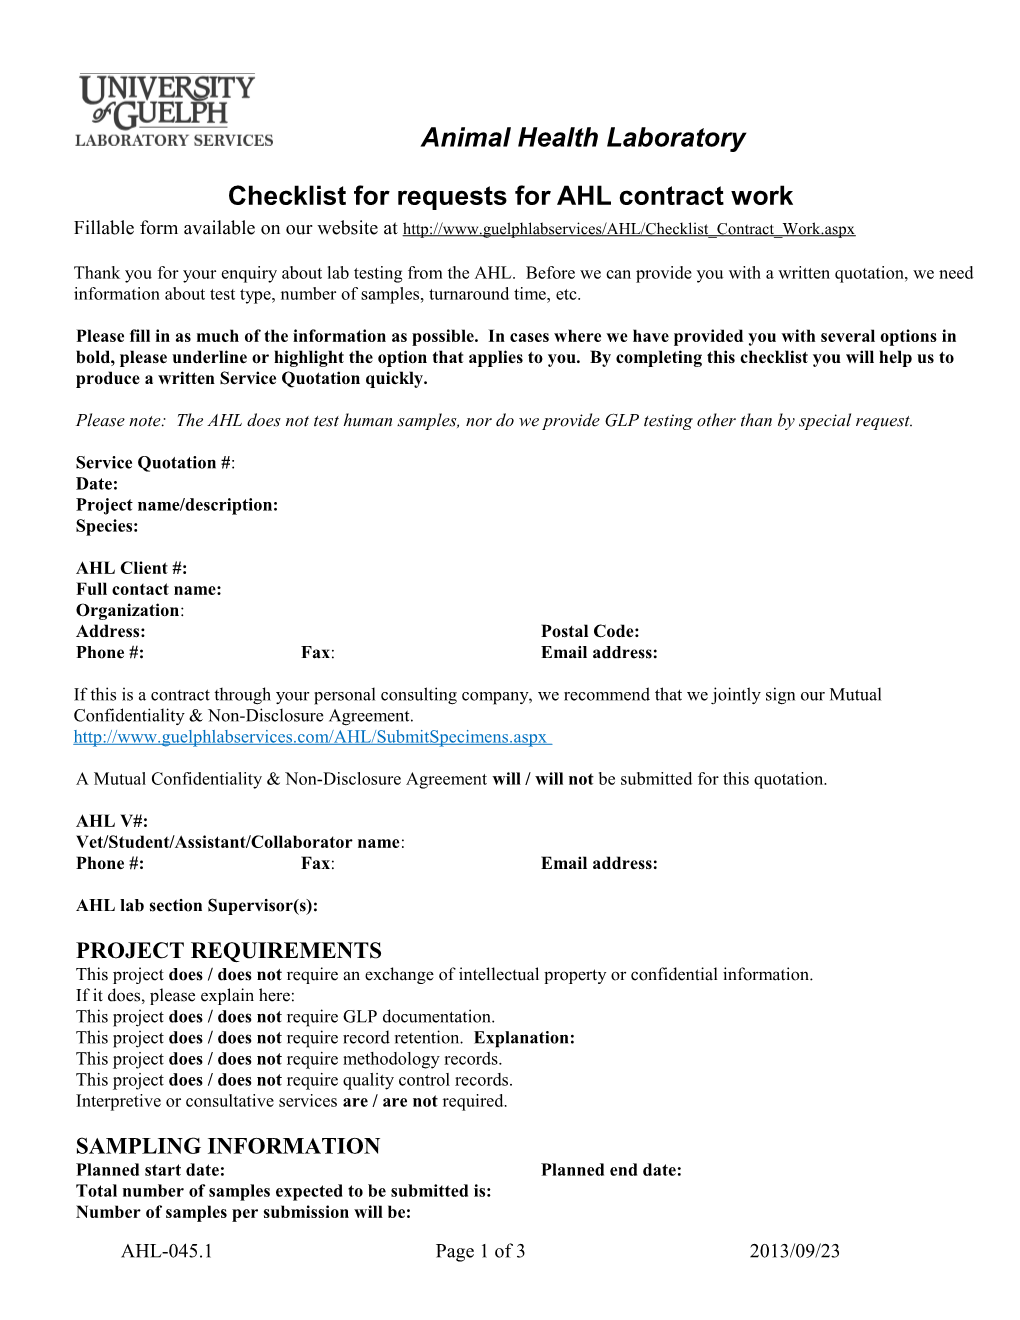 Checklist for Requests for AHL Contract Work